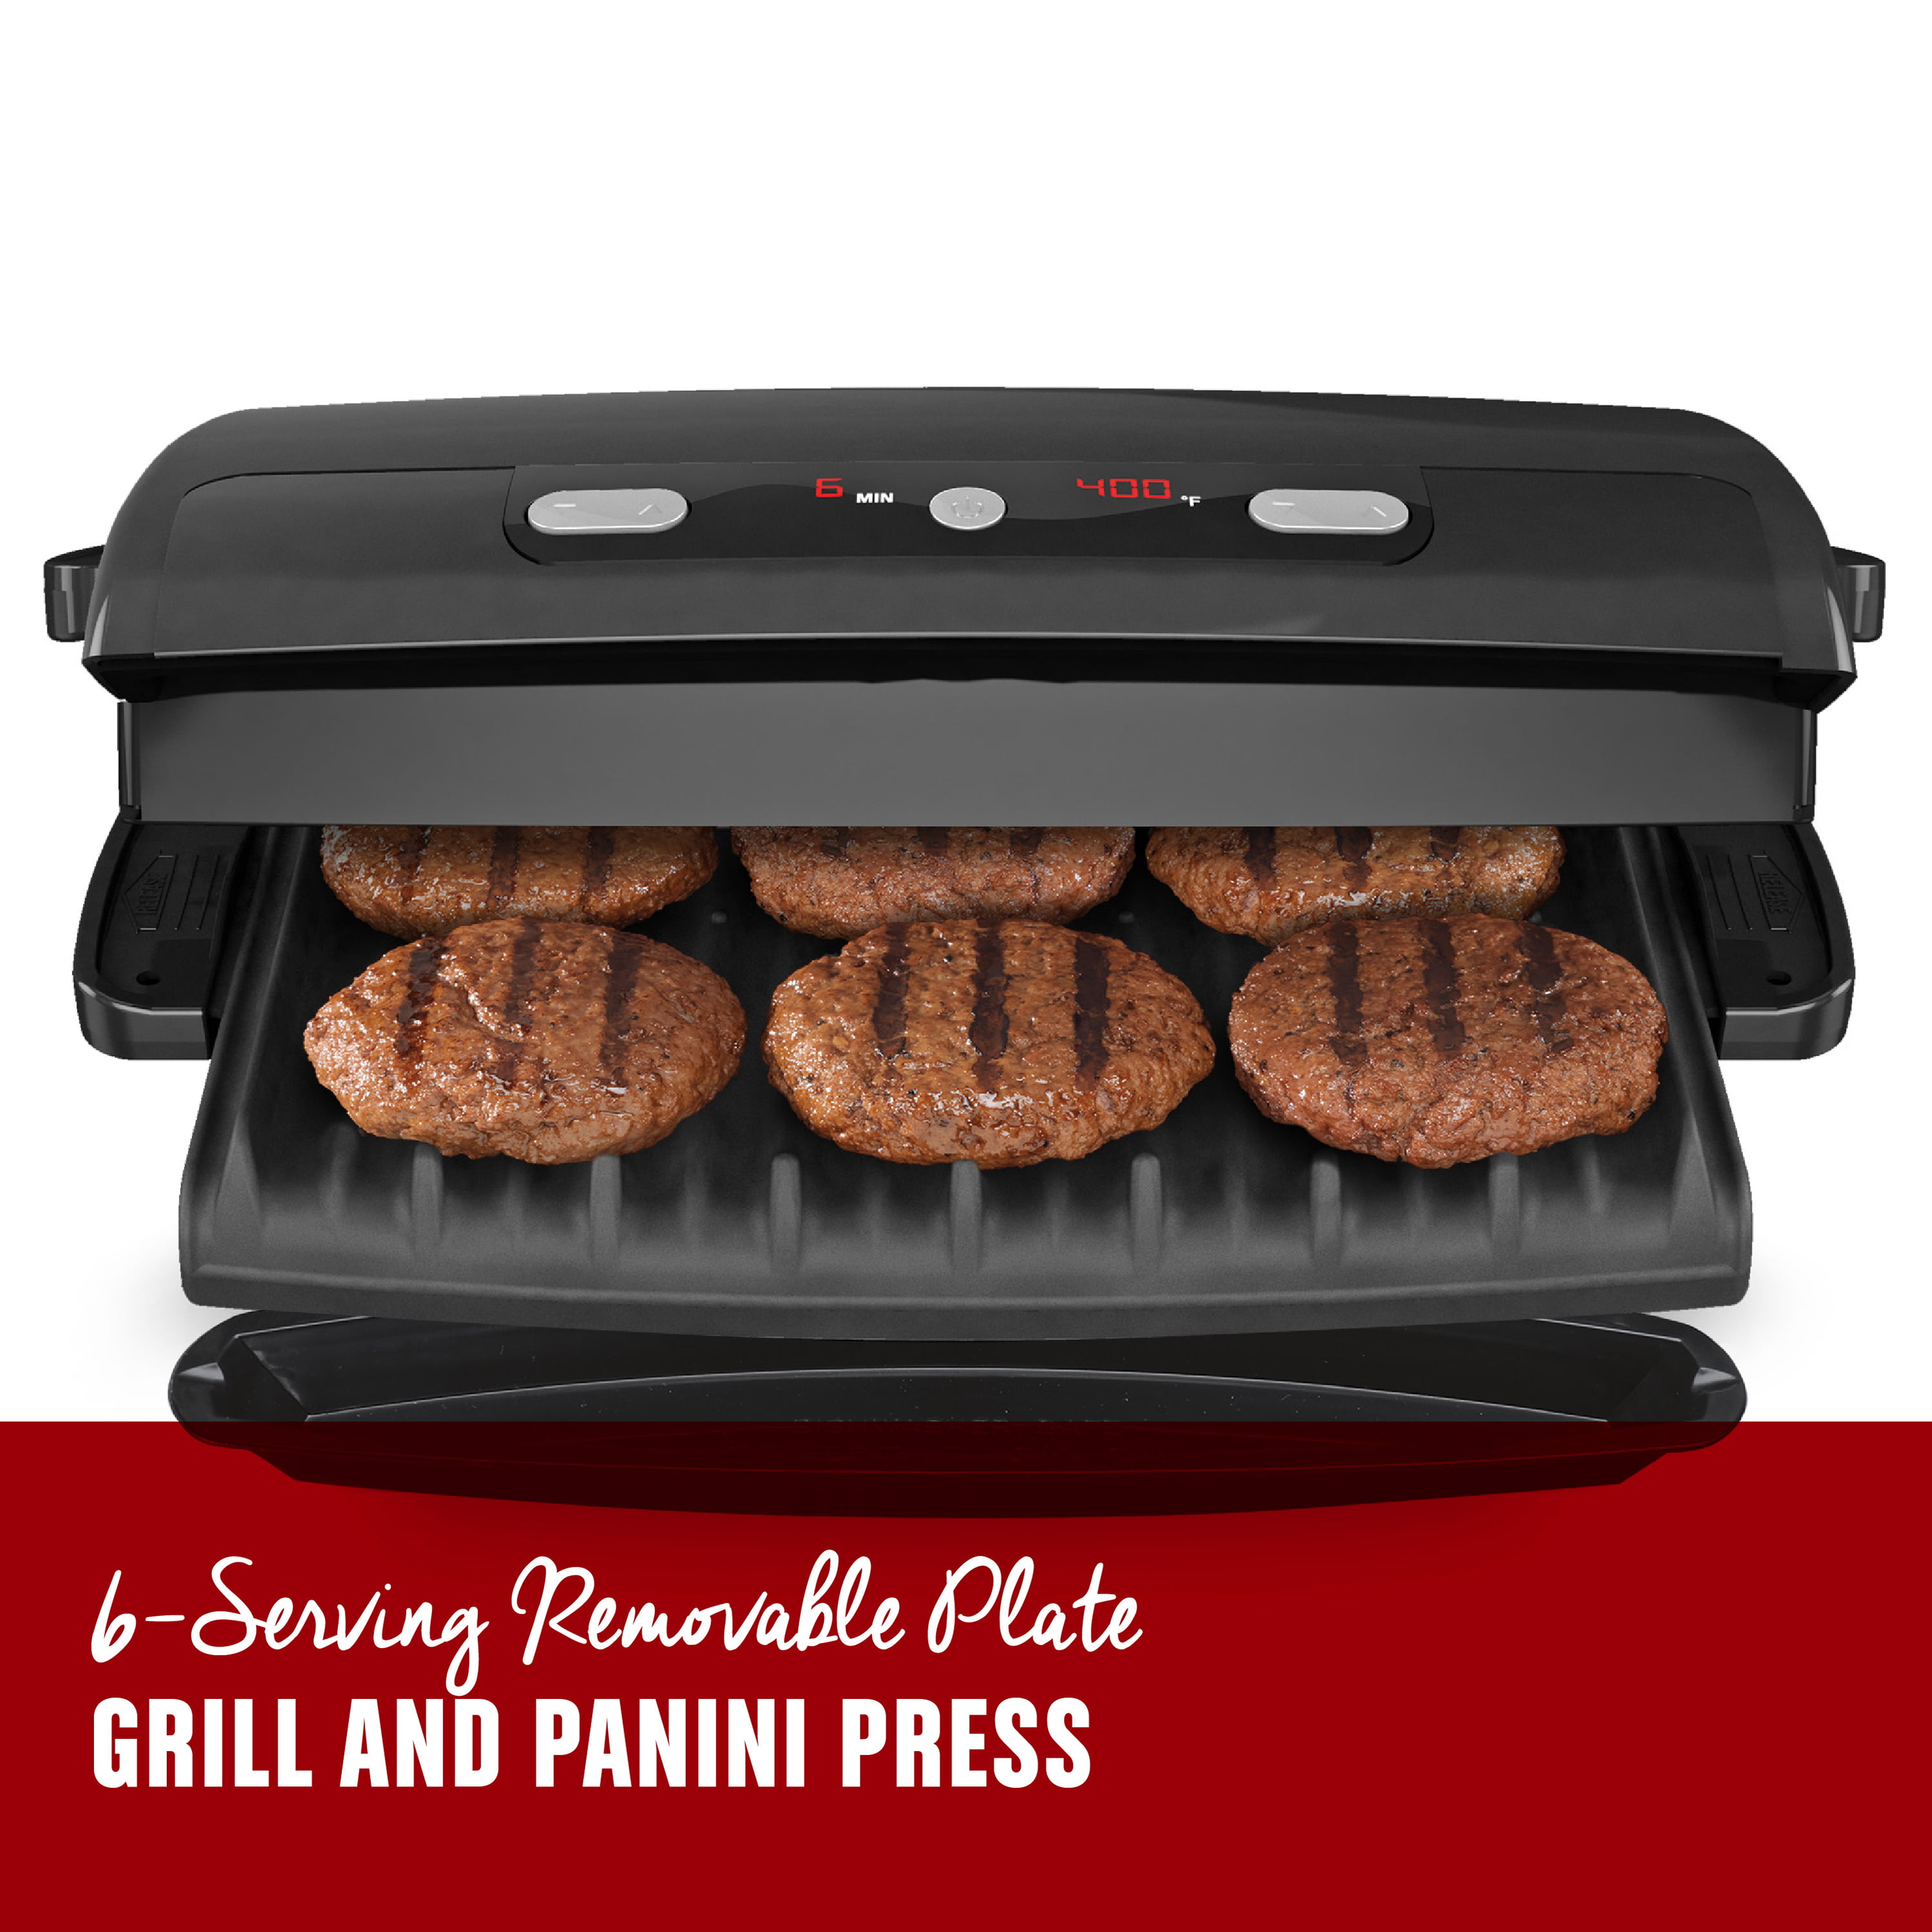 6-Serving Removable Plate Grill - Red